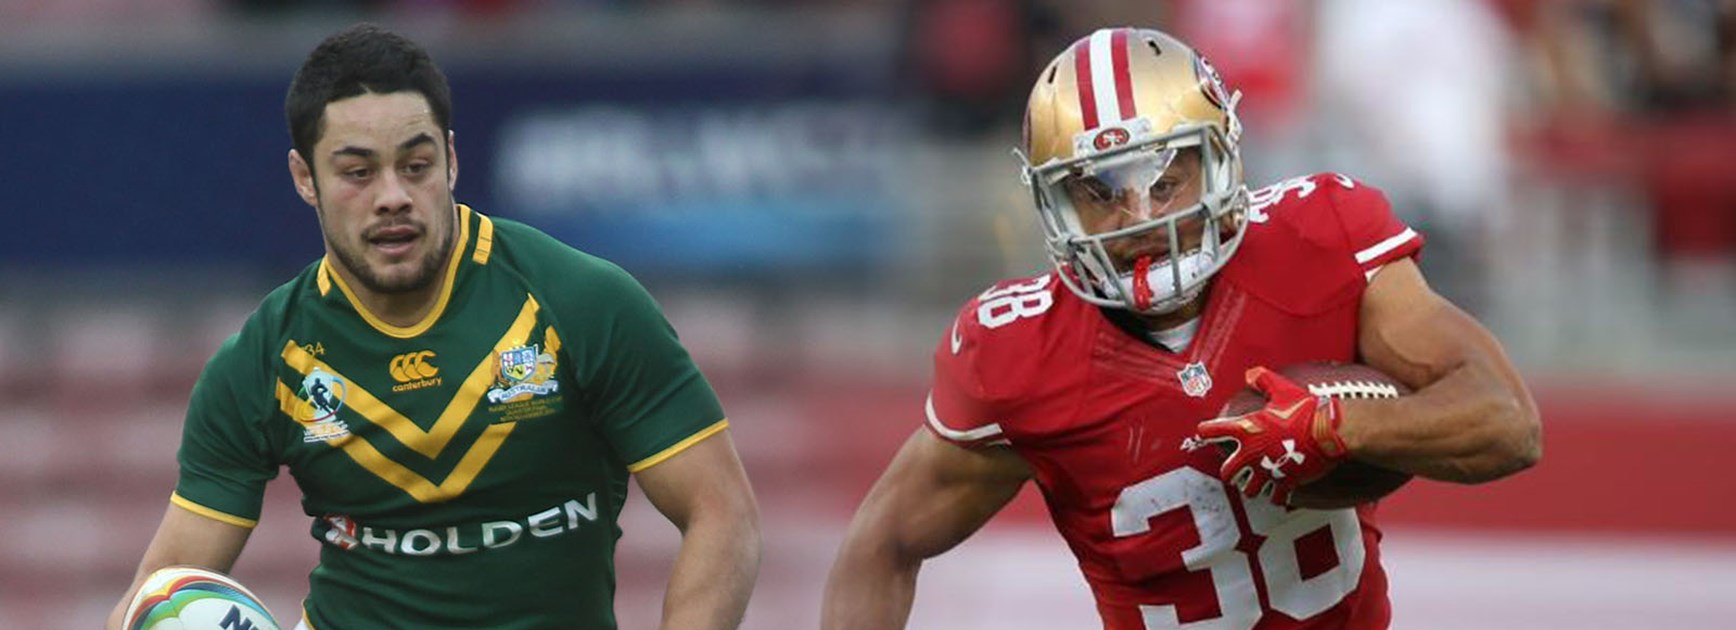 From the NRL to the NFL. Jarryd Hayne has chased his dream and succeeded with a contract at the 49ers.